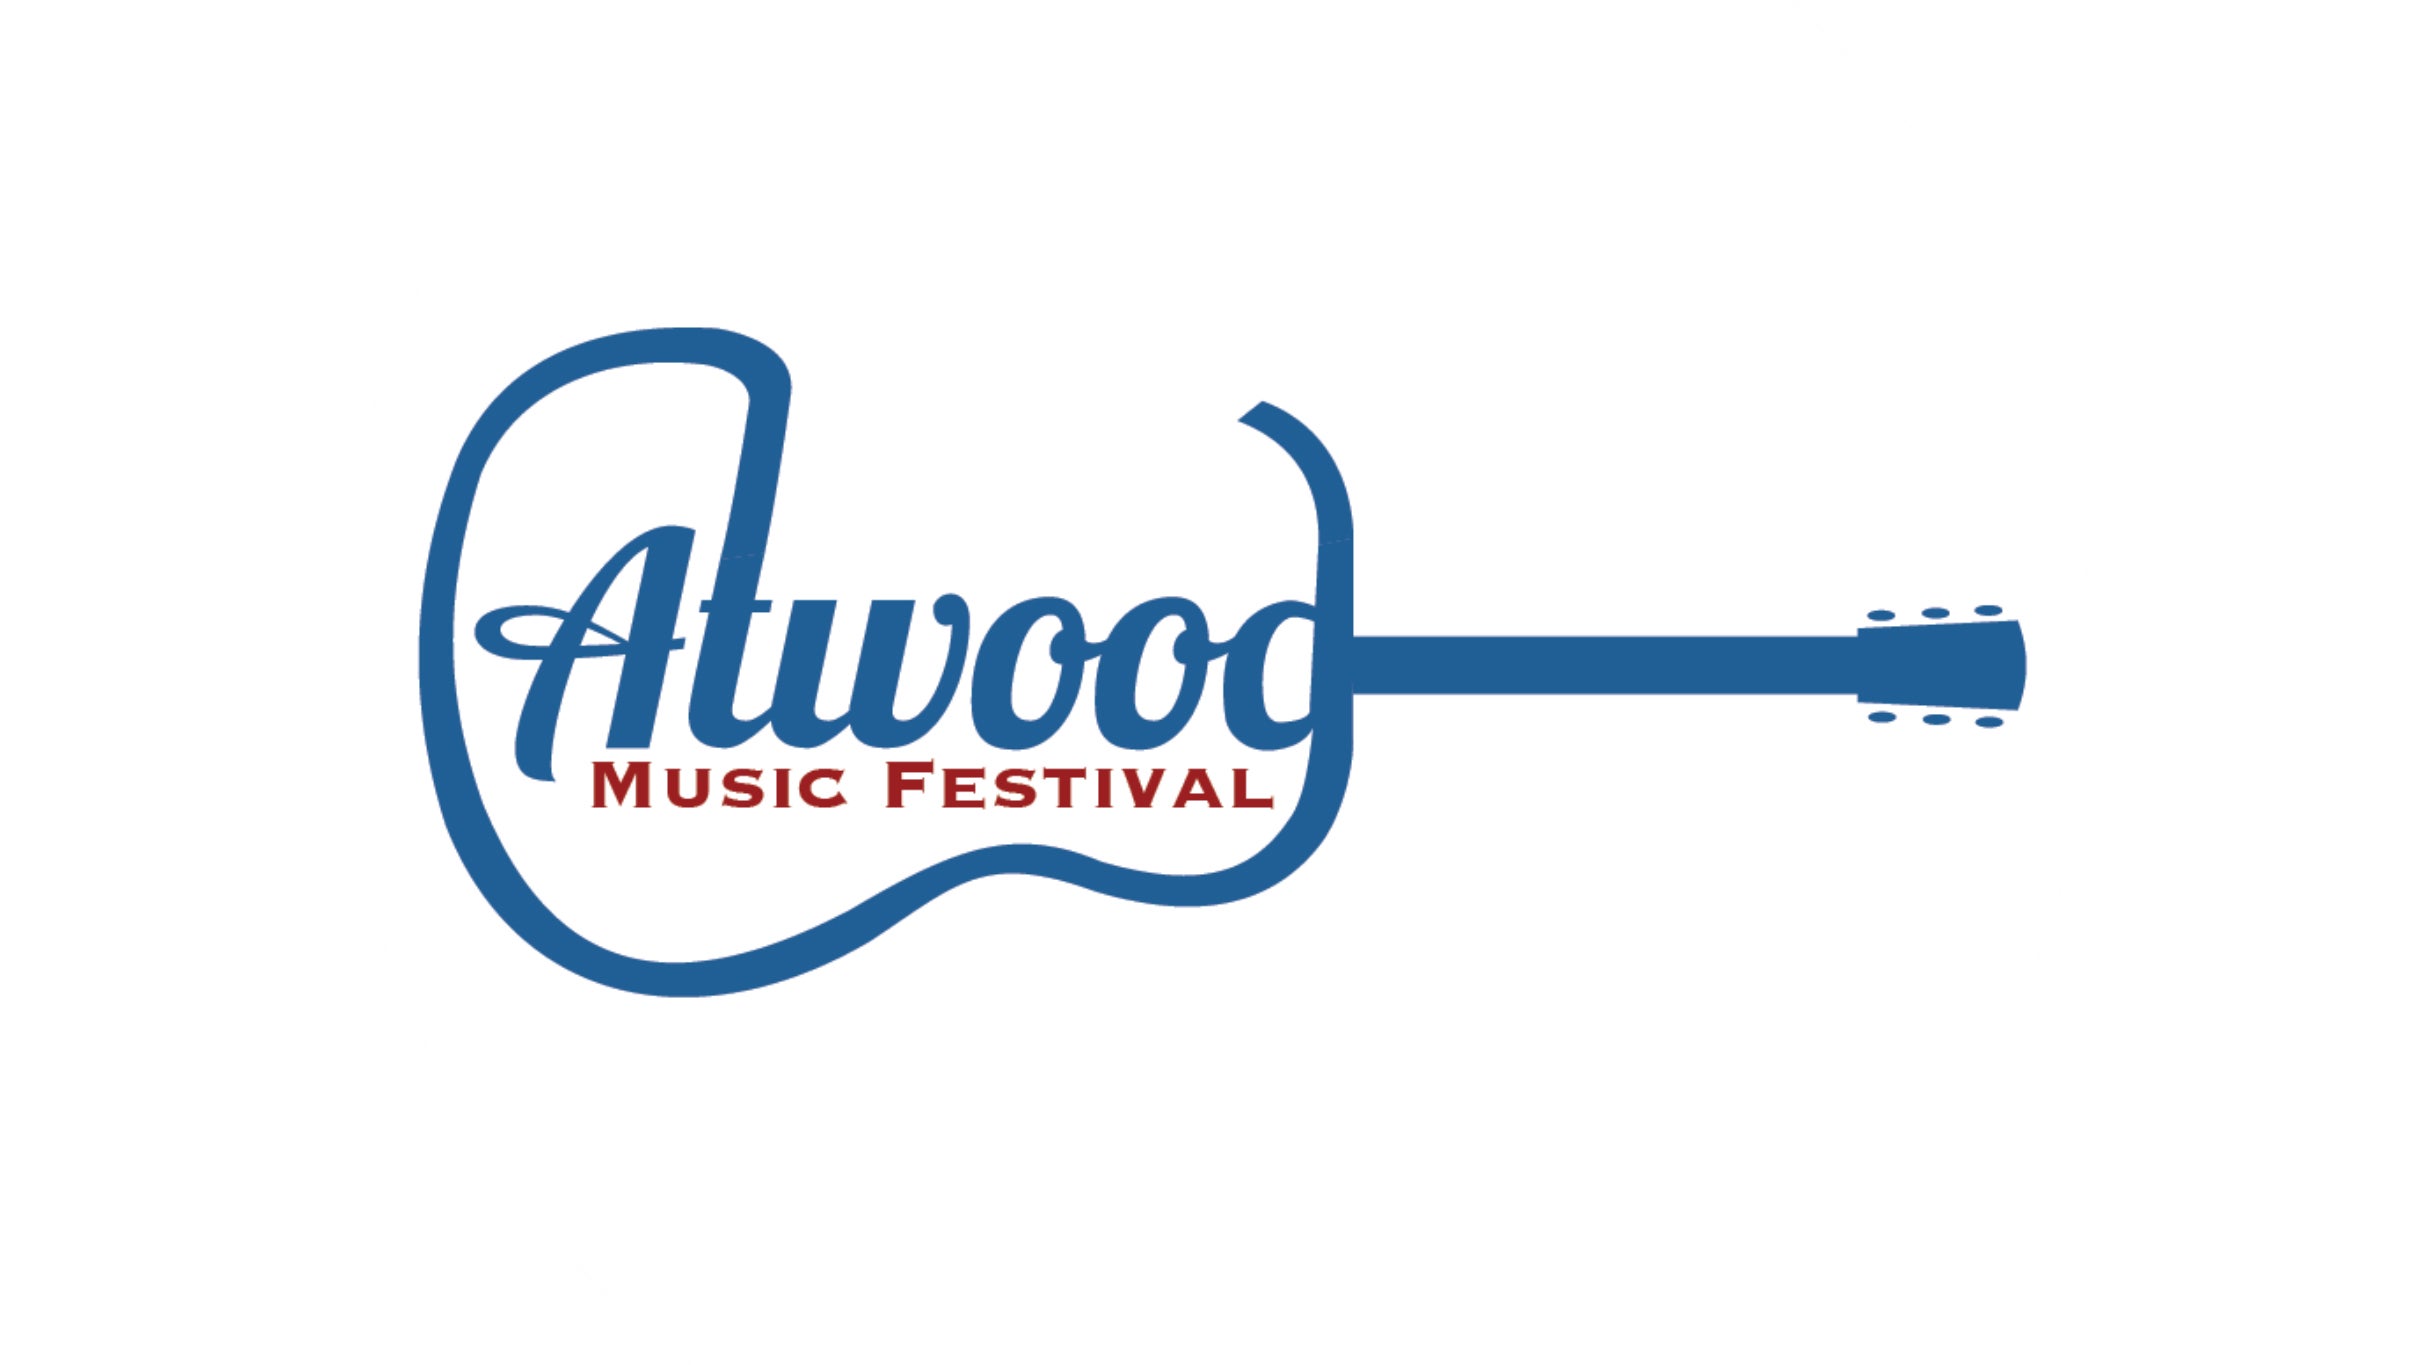 50th Annual Atwood Music Festival at Atwood Water Park